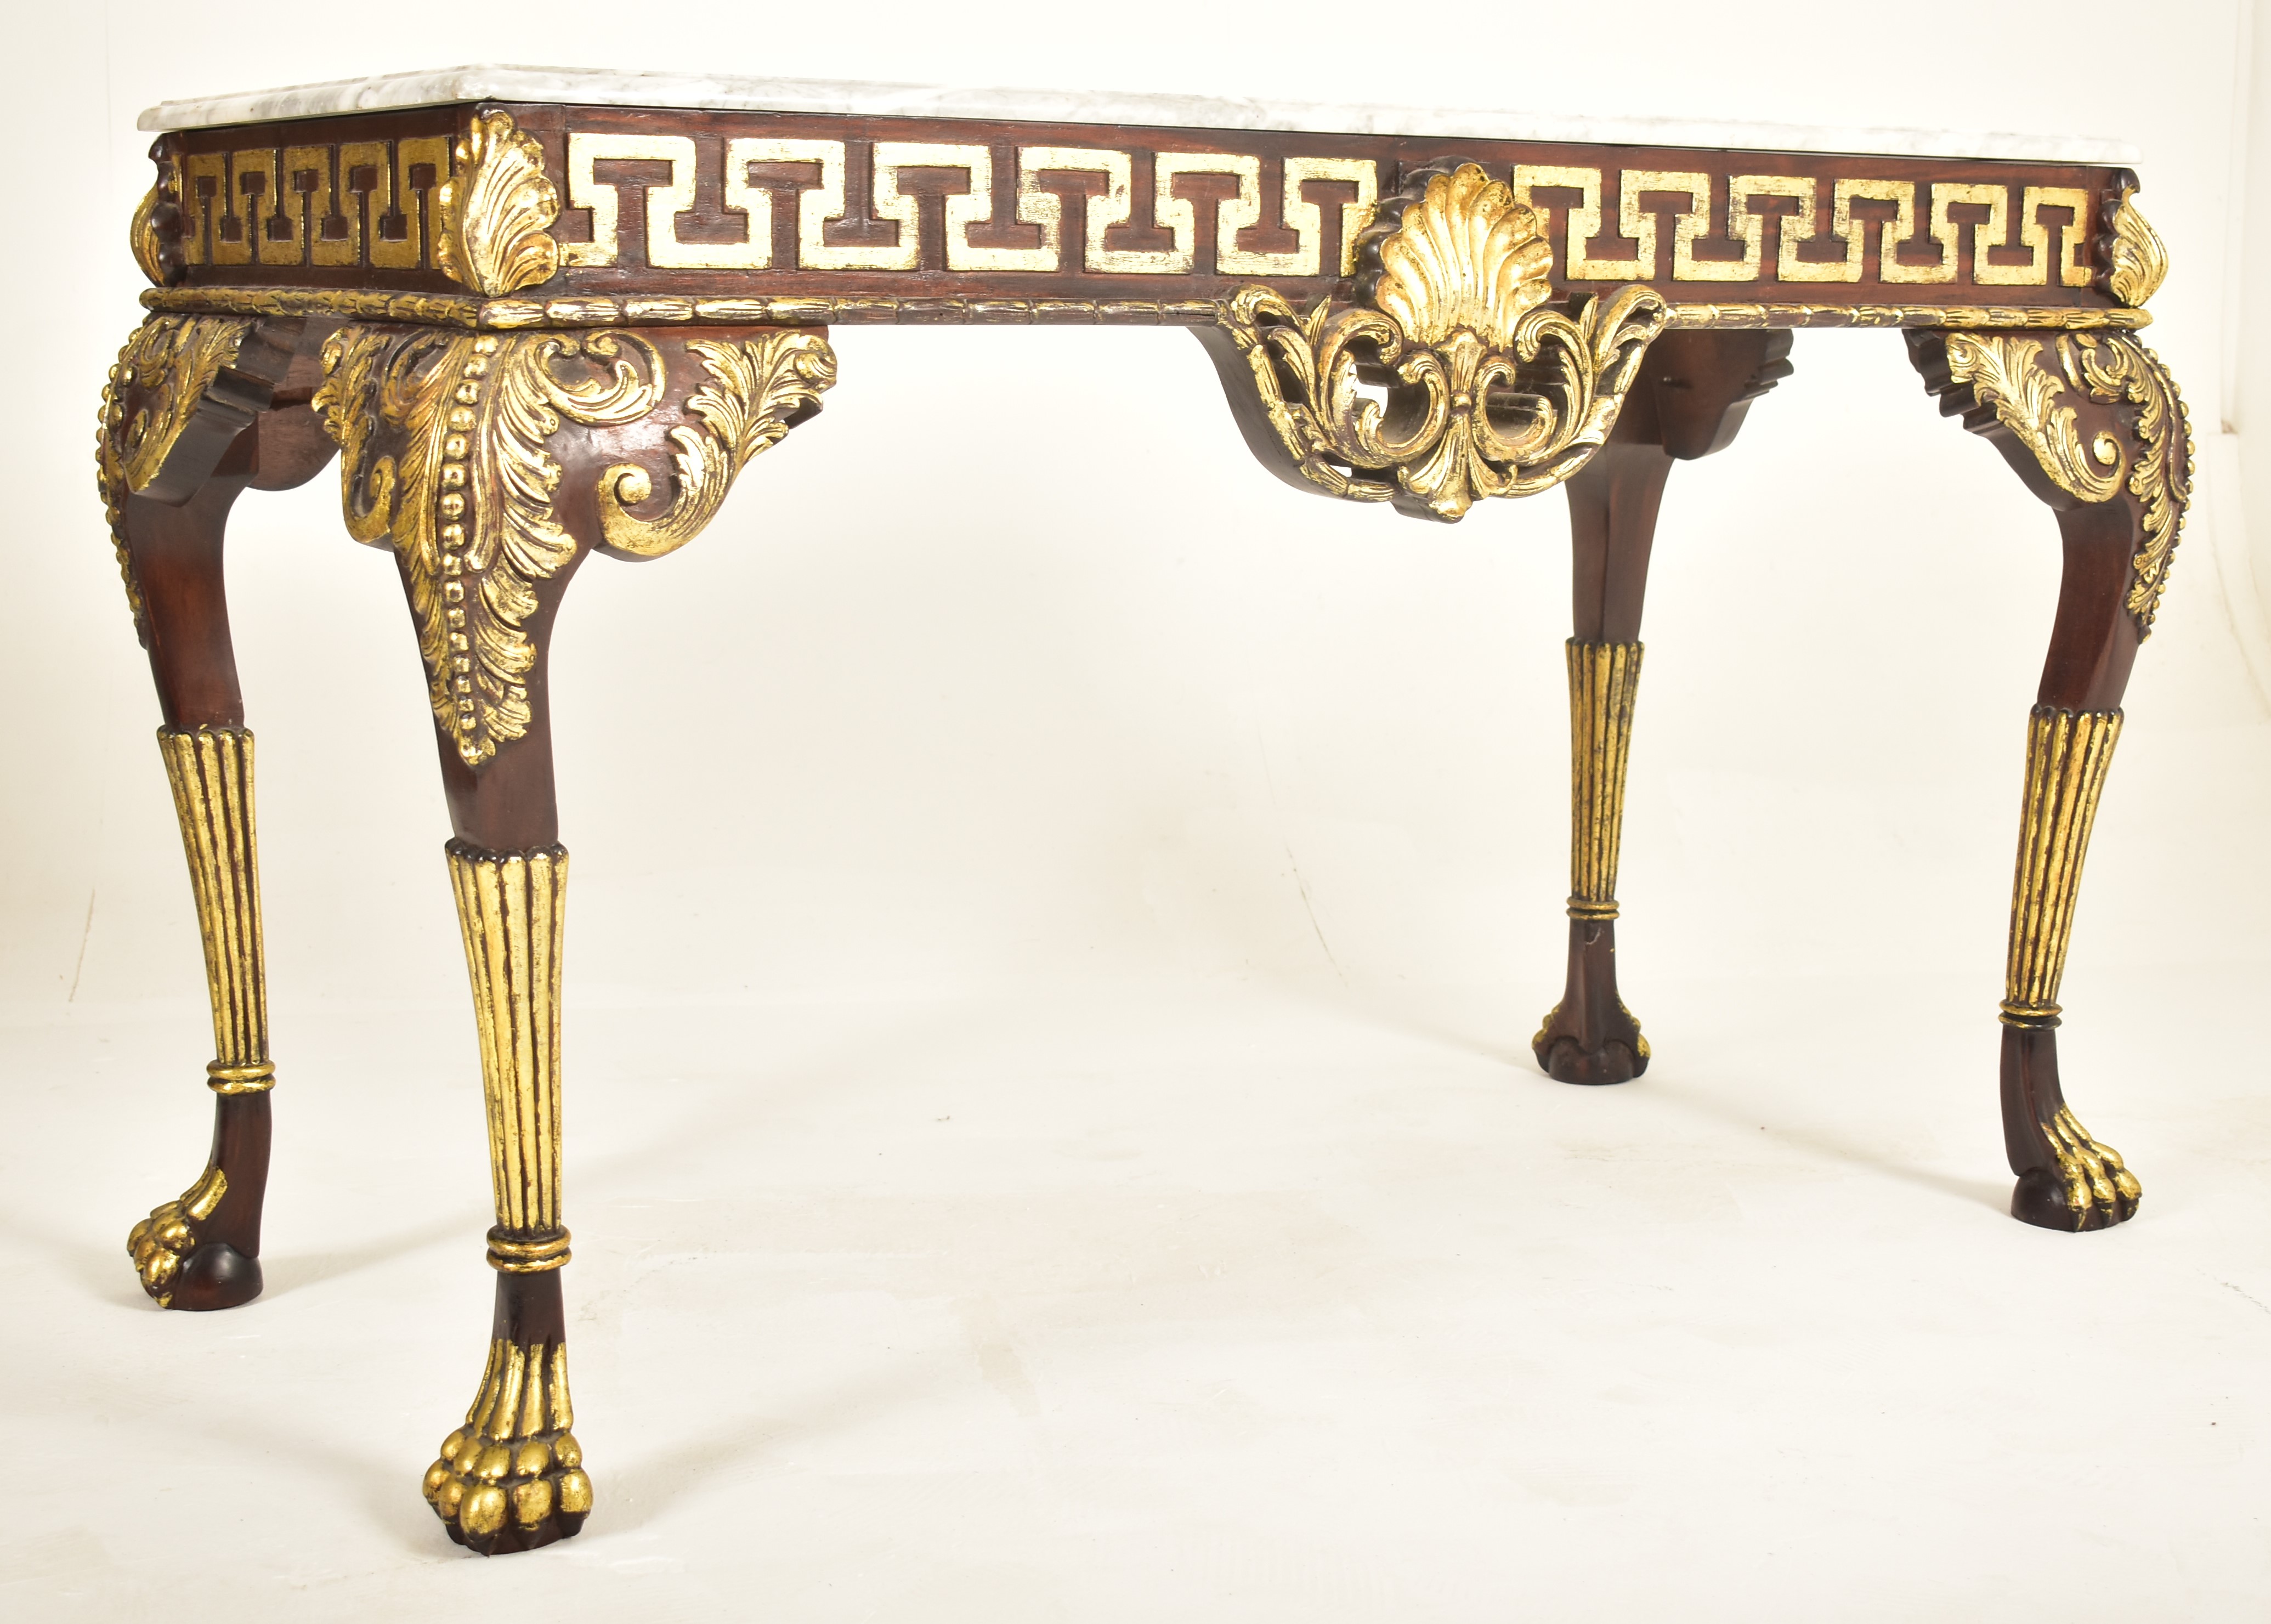 WILLIAM KENT 18TH CENTURY INSPIRED GILT WOOD & MARBLE HALL TABLE